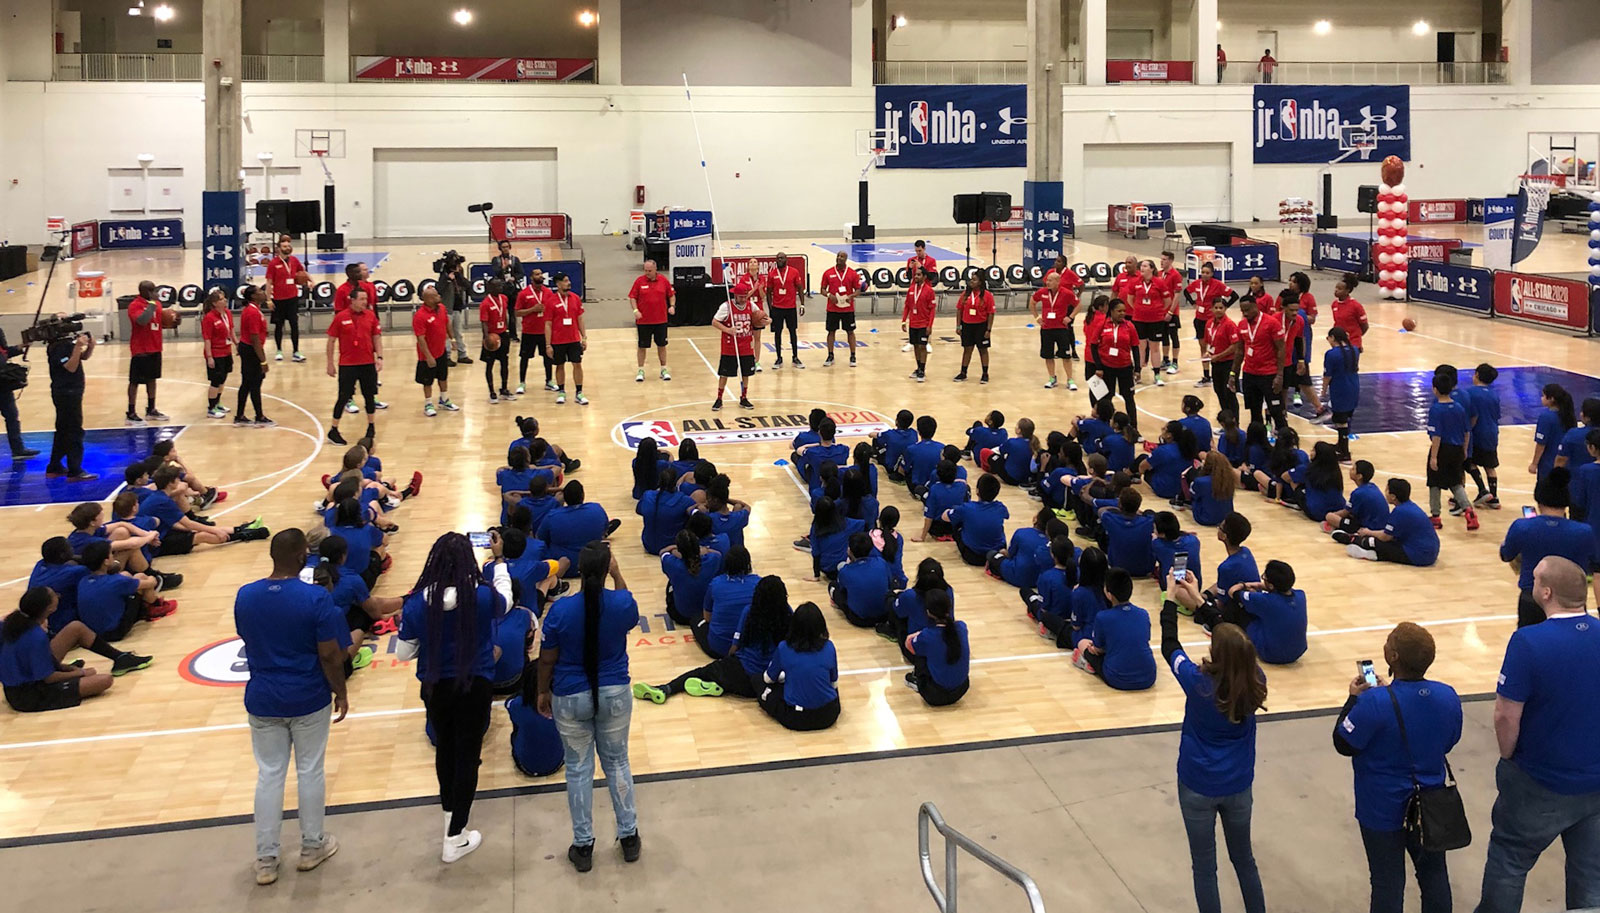 Participants learn from the pros at the NBA All-Star event